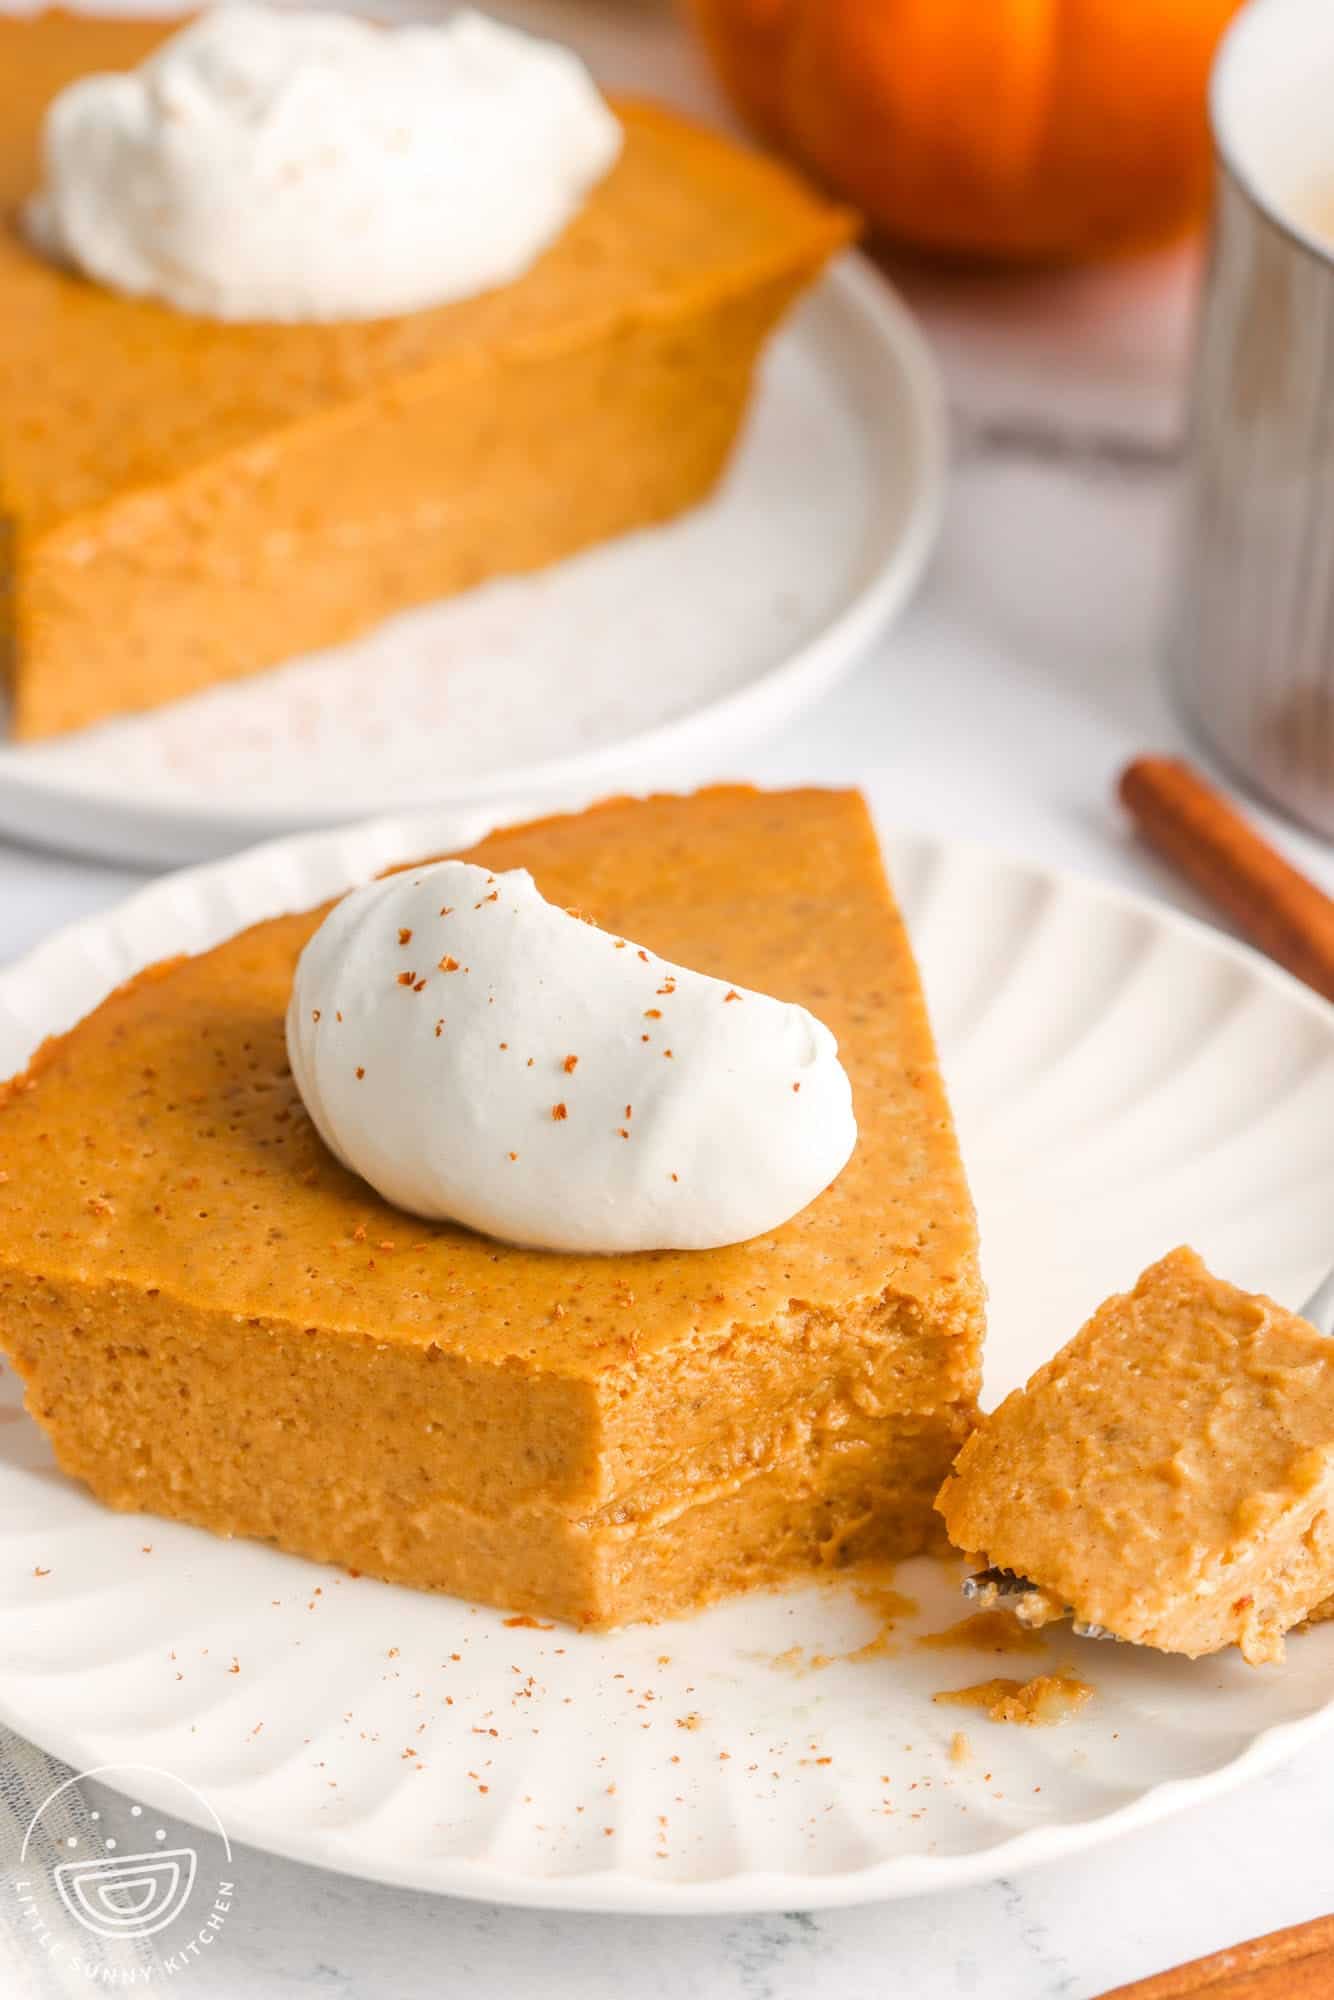 a slice of crustless pumpkin pie on a plate with a bite taken.